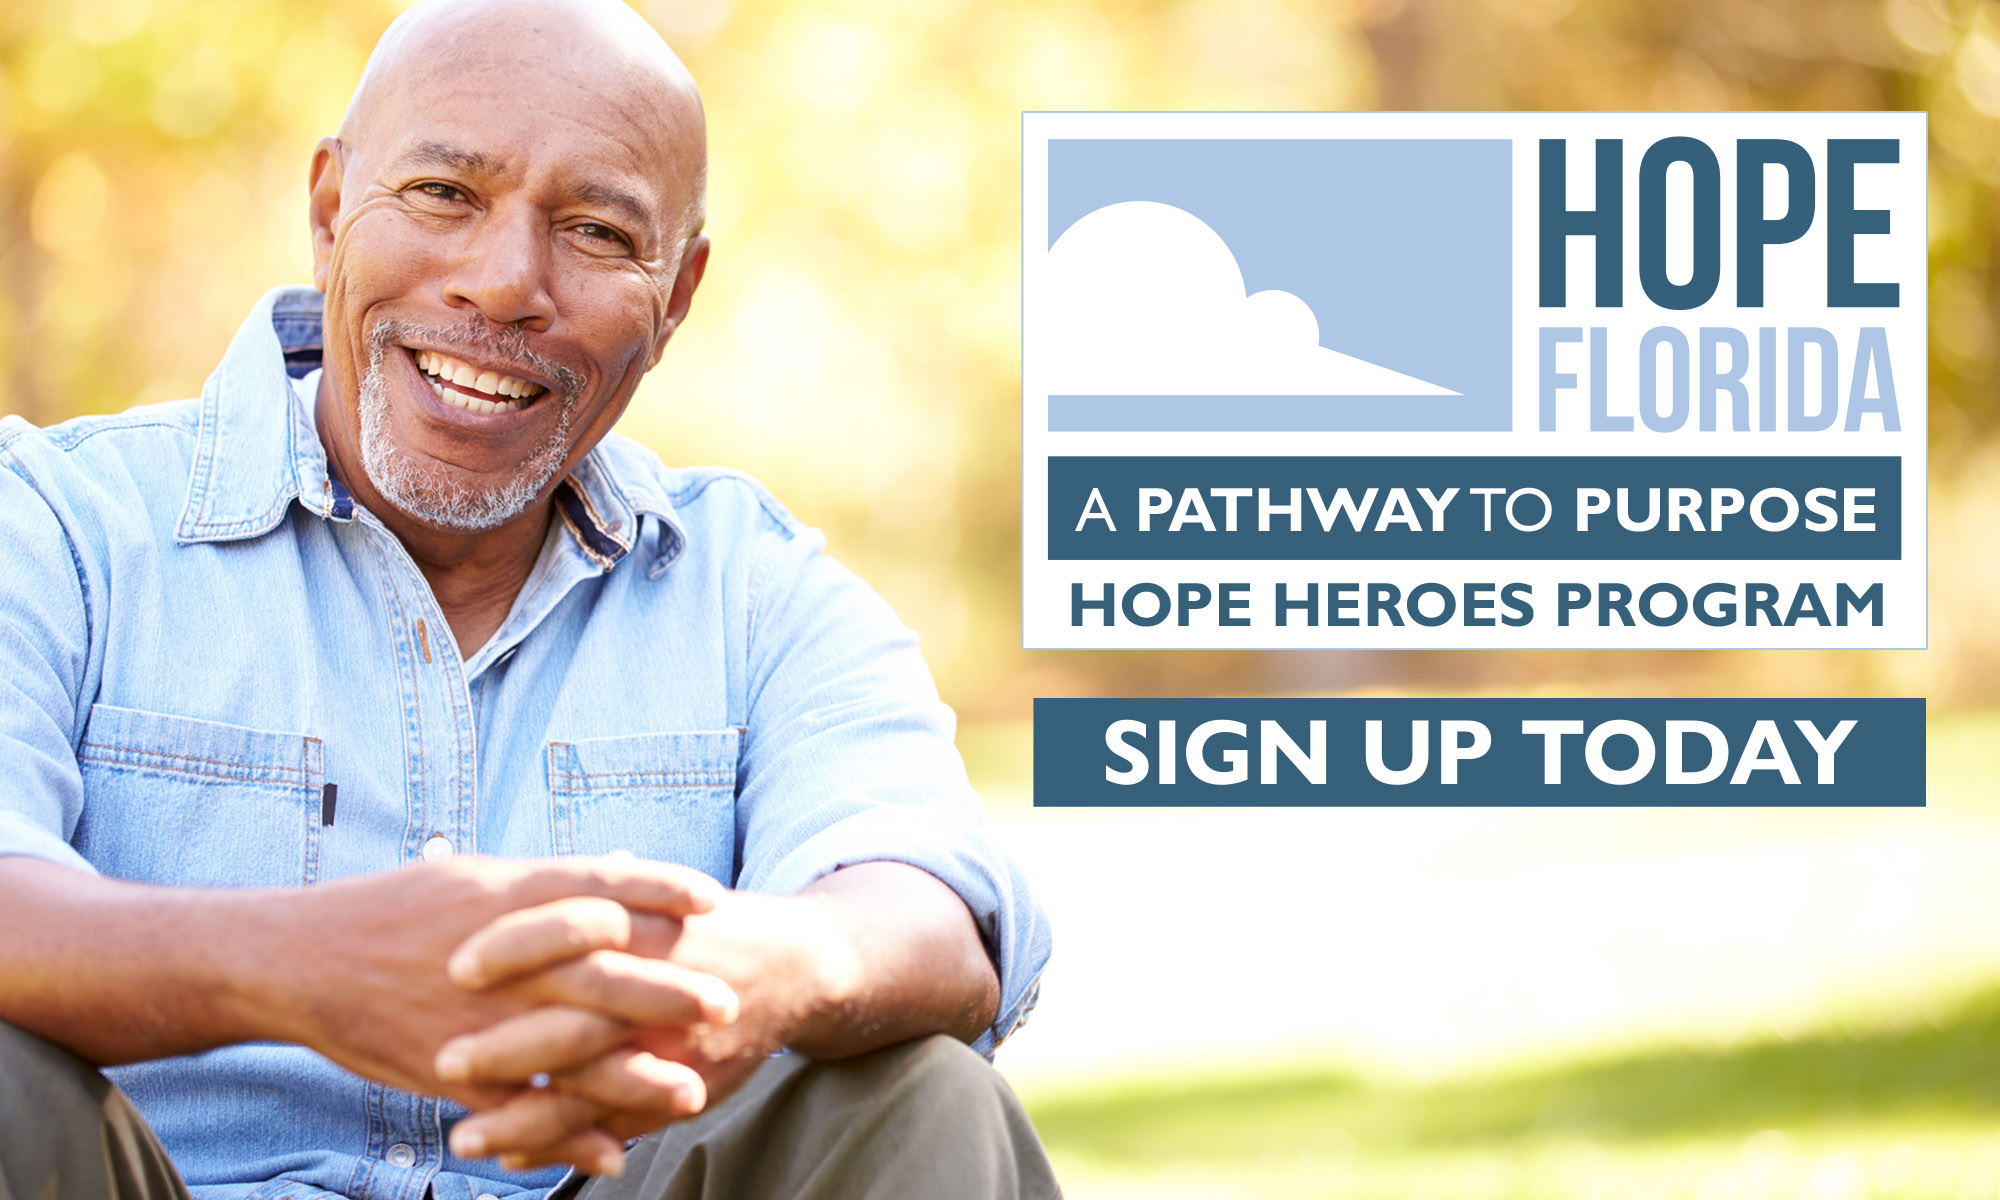 Hope Florida - A Pathway to Purpose